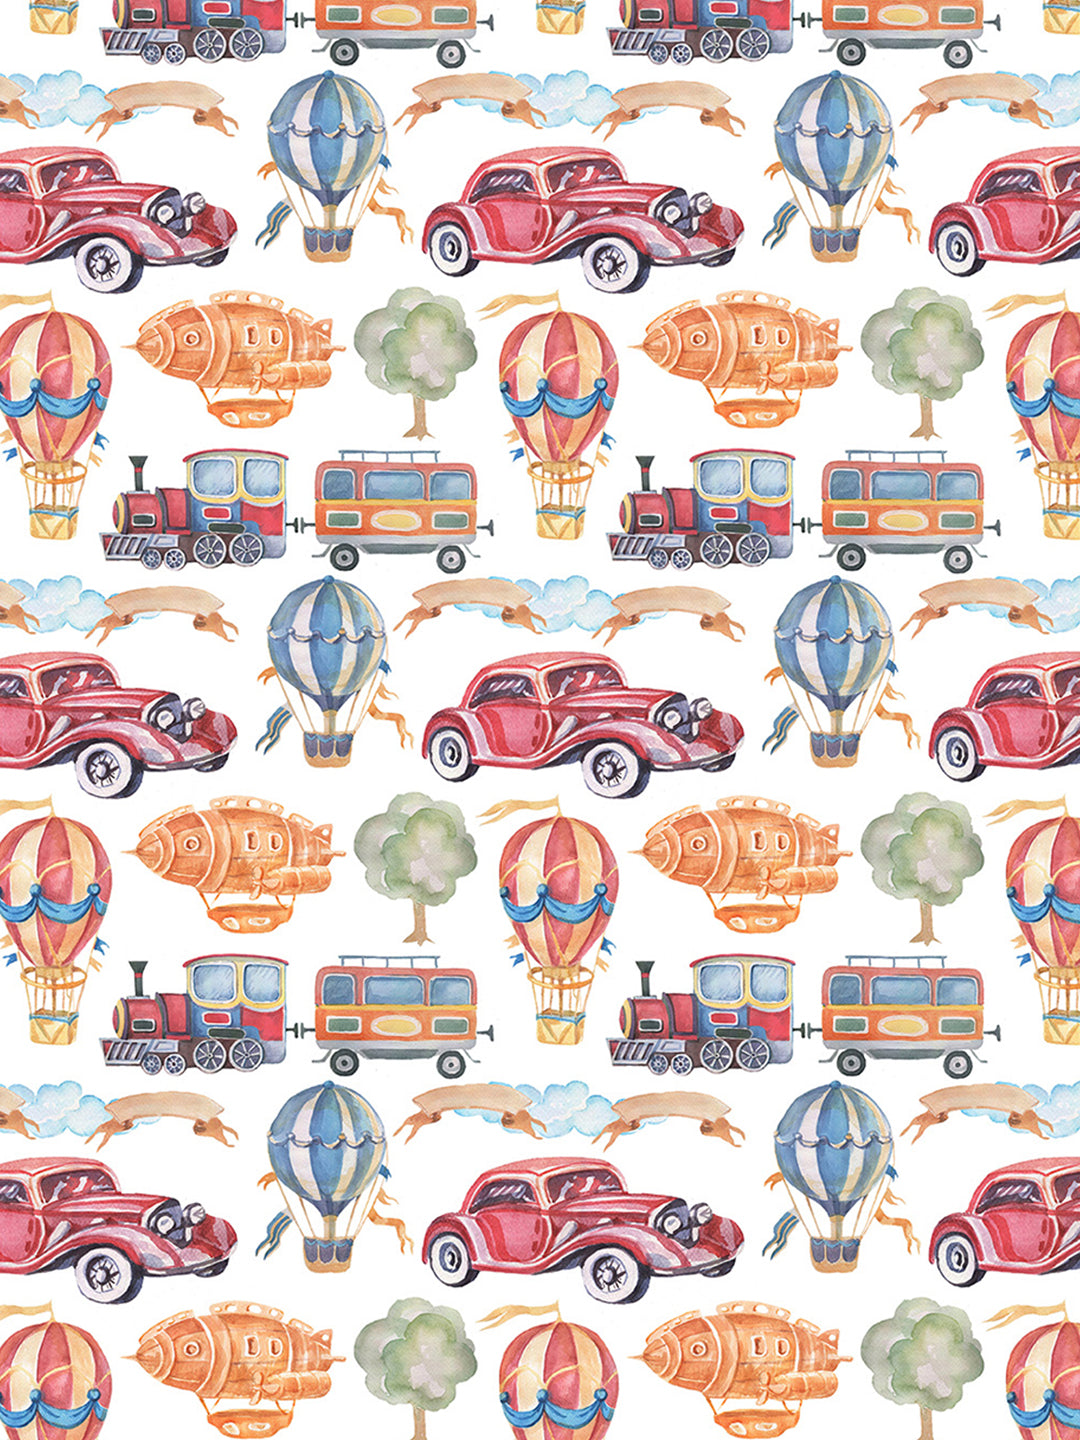 Cars and Train Print 6 Seater Table Cover